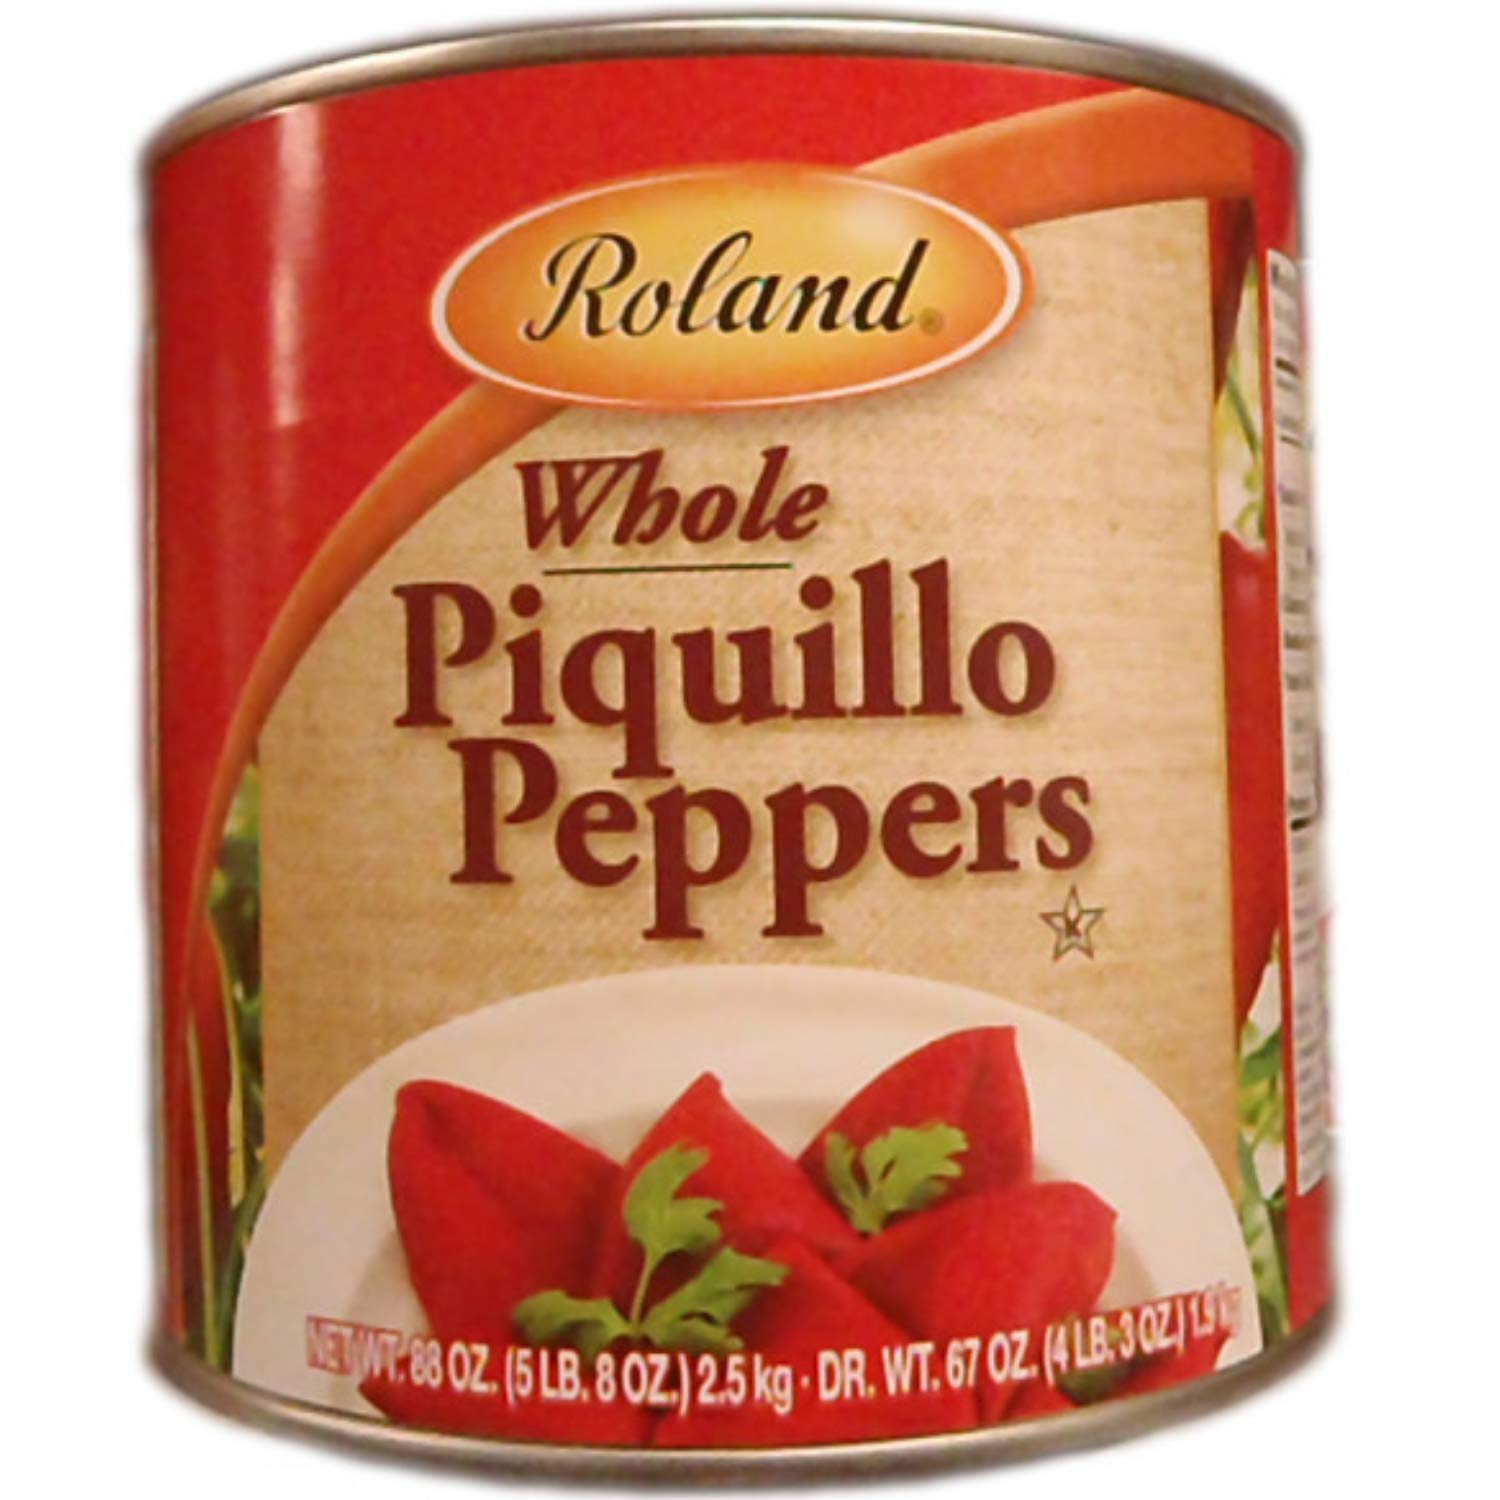 Roland Foods Whole Red Piquillo Peppers, Specialty Imported Food, 5 Lb 8 Oz Can